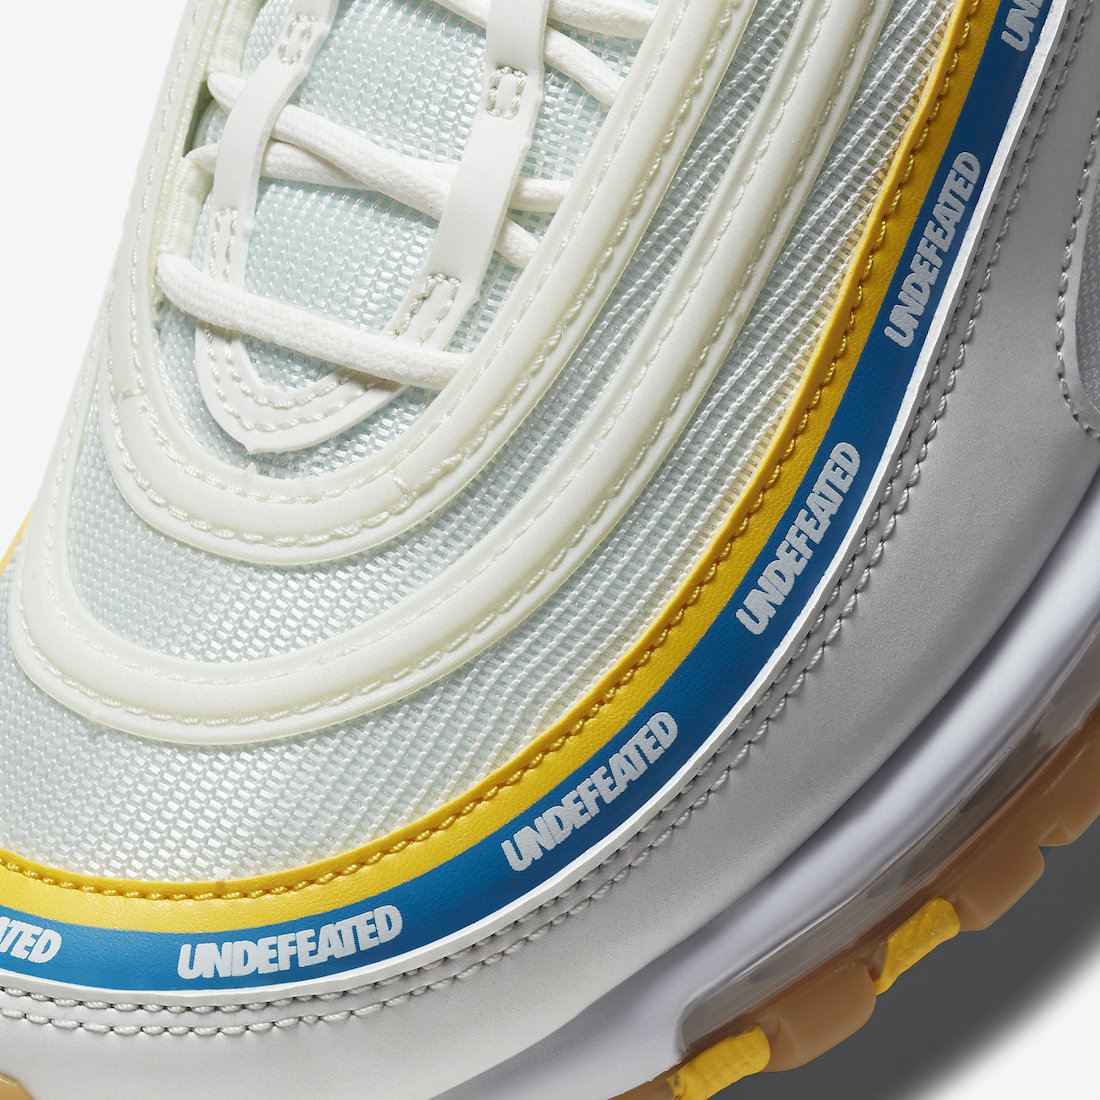 Undefeated Nike Air Max 97 Sail DC4830-100 Release Date